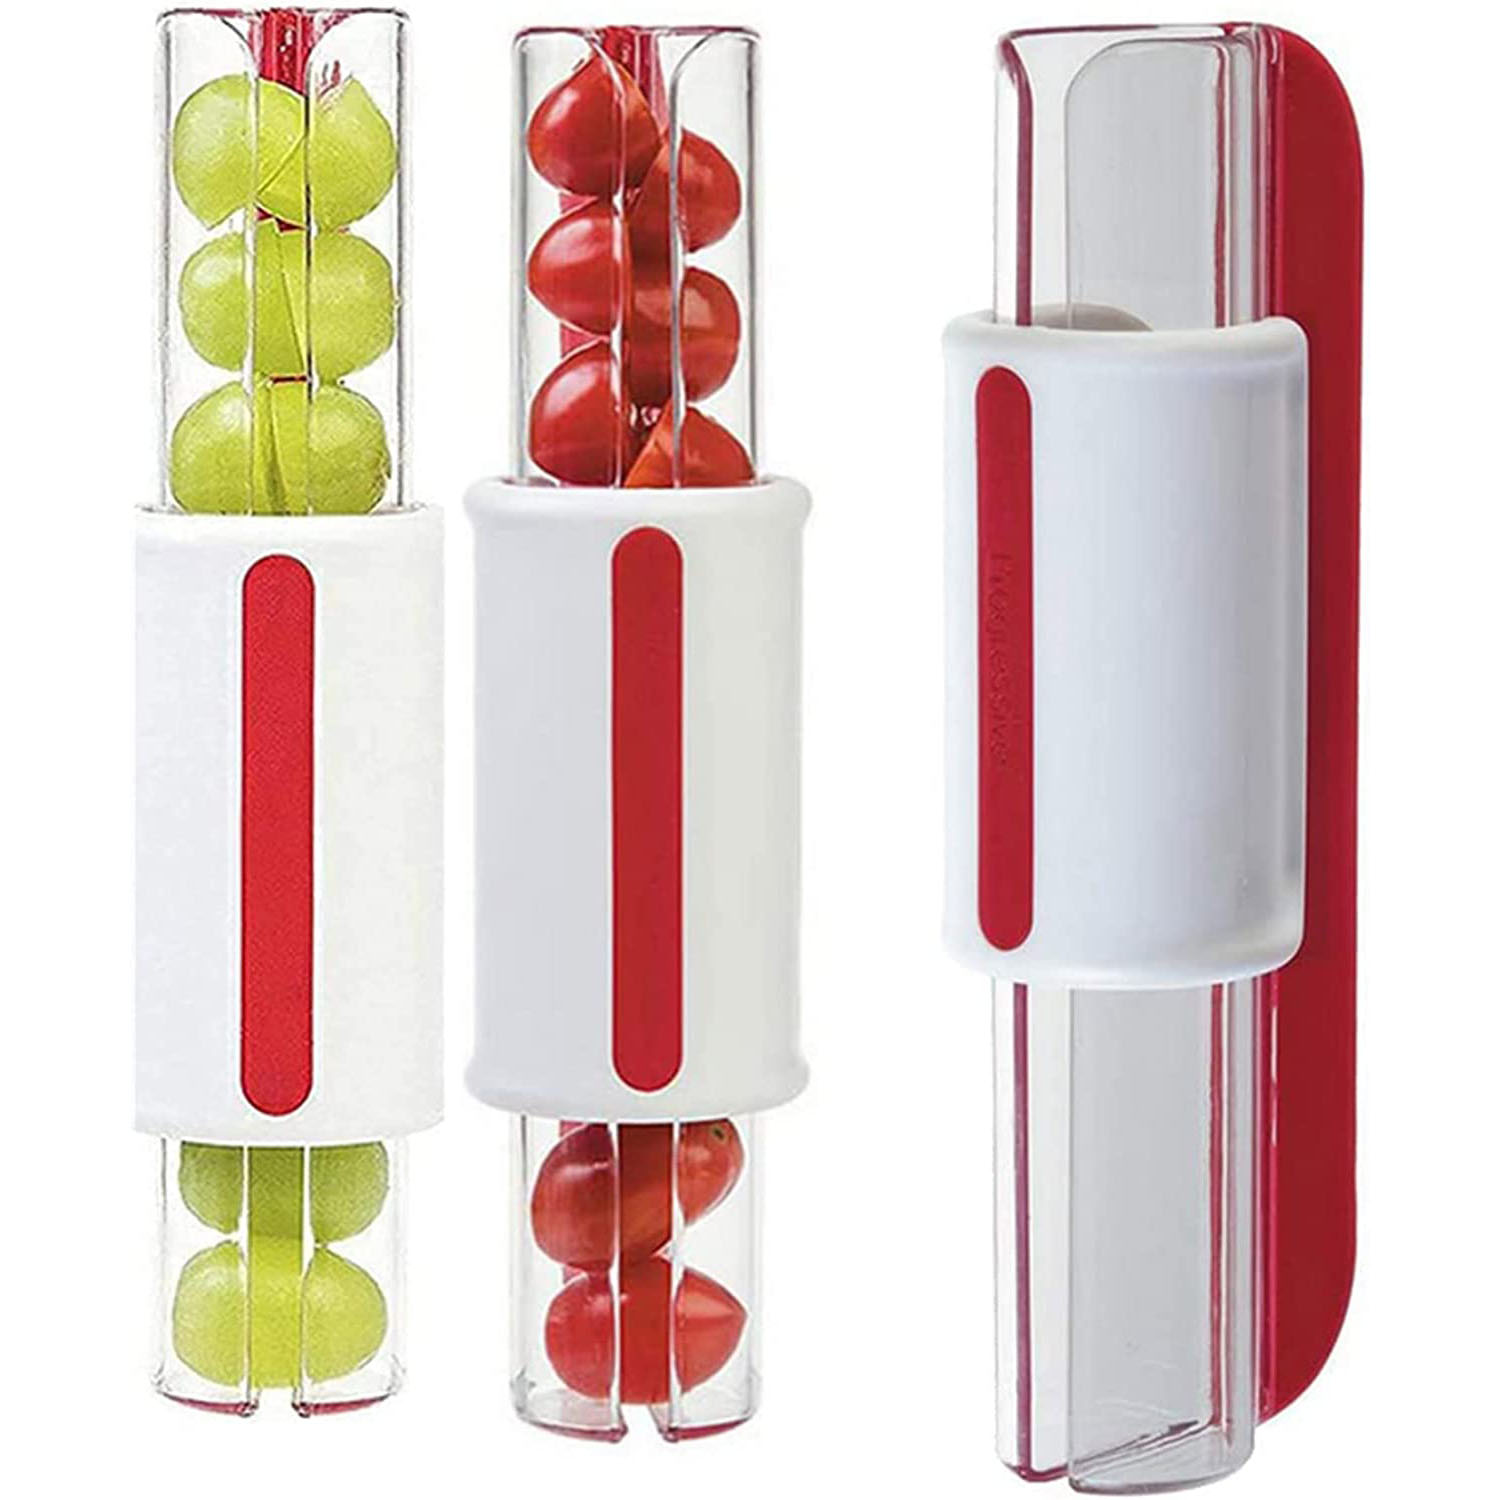 Dropship 1pc; Tomato Slicer; Grape Slicer; MultiFunctional Grape Cutter;  Small Fruit Cutter; Grape Kitchen Accessories; Cake Decoration Tool; Fruit  Slicer; Kitchen Tools to Sell Online at a Lower Price